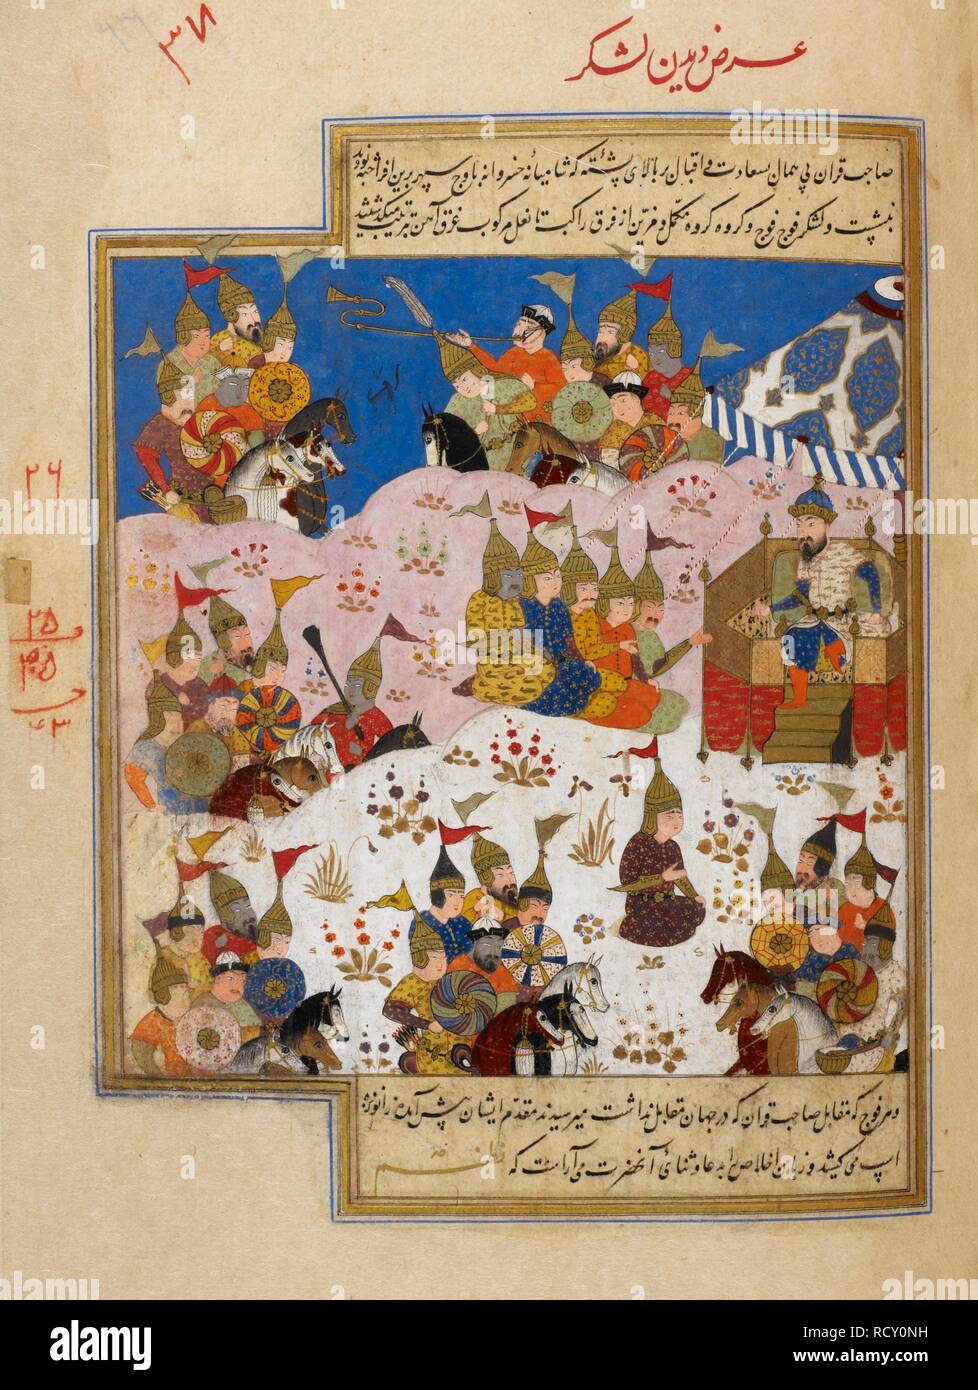 Timur receiving petitions. Zafarnama. 1533. Timur receiving petitions from the army. A miniature painting from a sixteenth century manuscript of the Zafarnama. Image taken from Zafarnama. Originally published/produced in 1533. Source: I.O. ISLAMIC 137, f.380. Language: Persian. Stock Photo